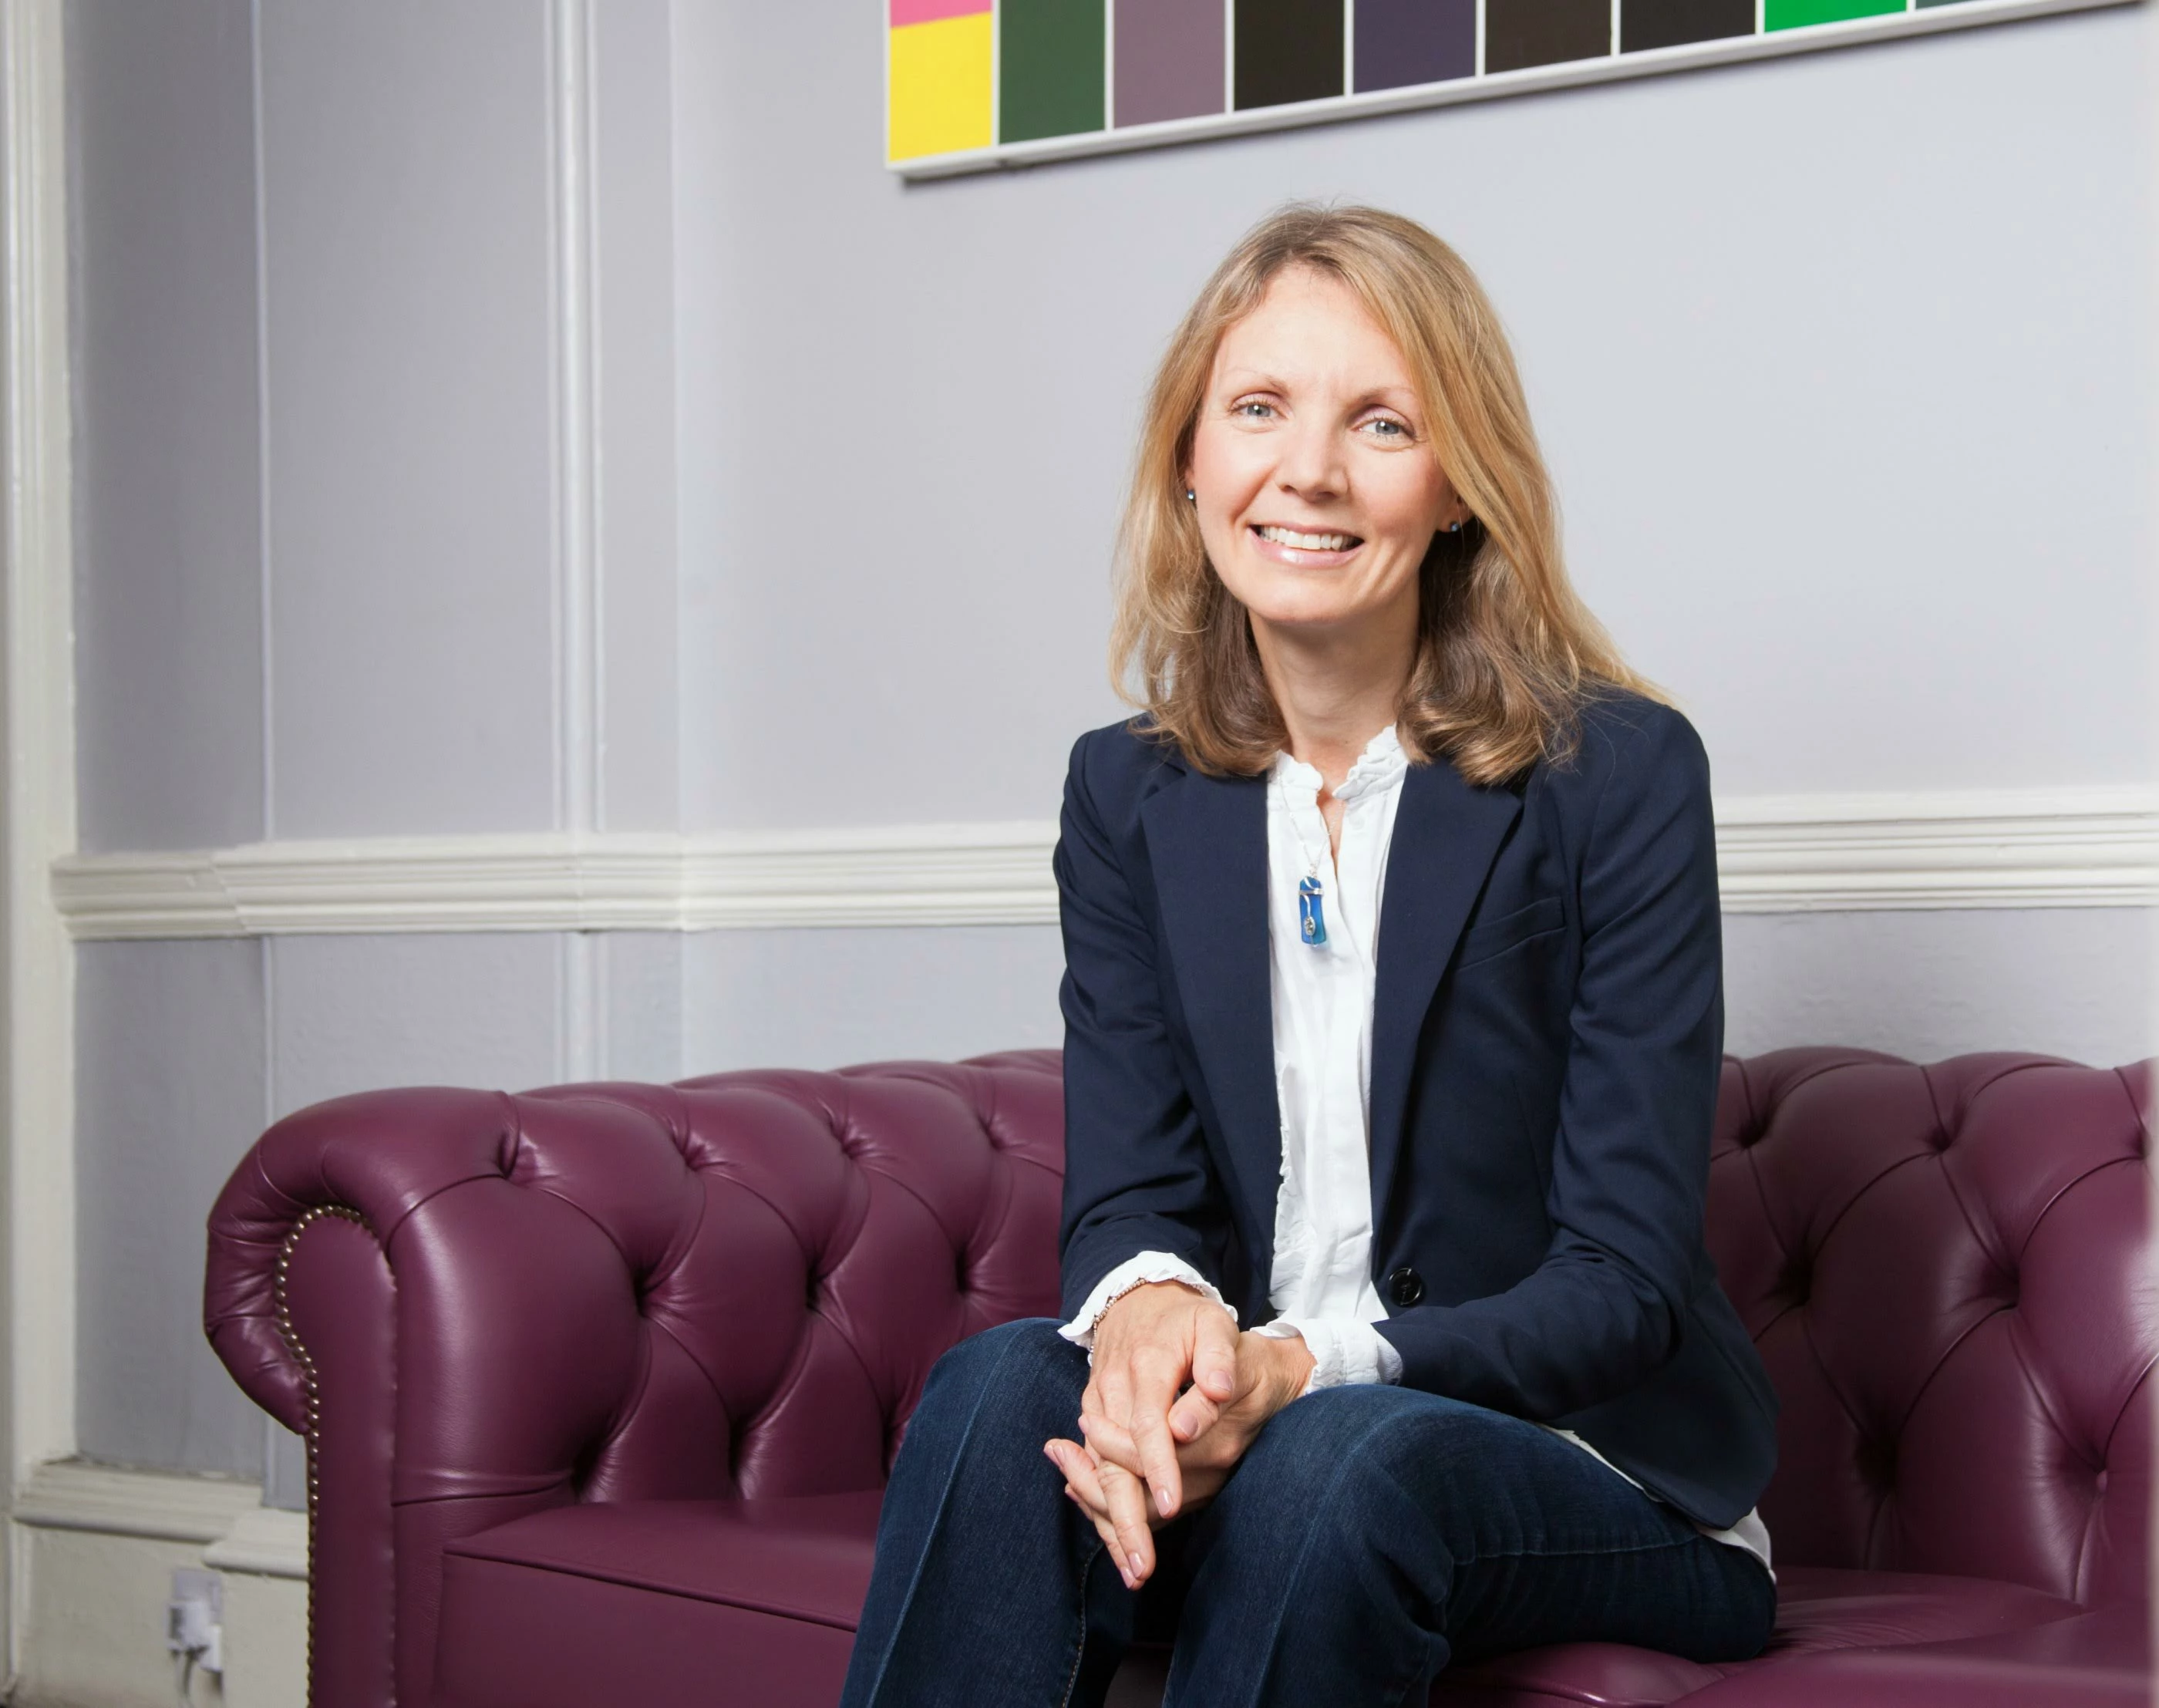 Alison Freer, Director of Consulting, Learning & Digital Transformation at durhamlane